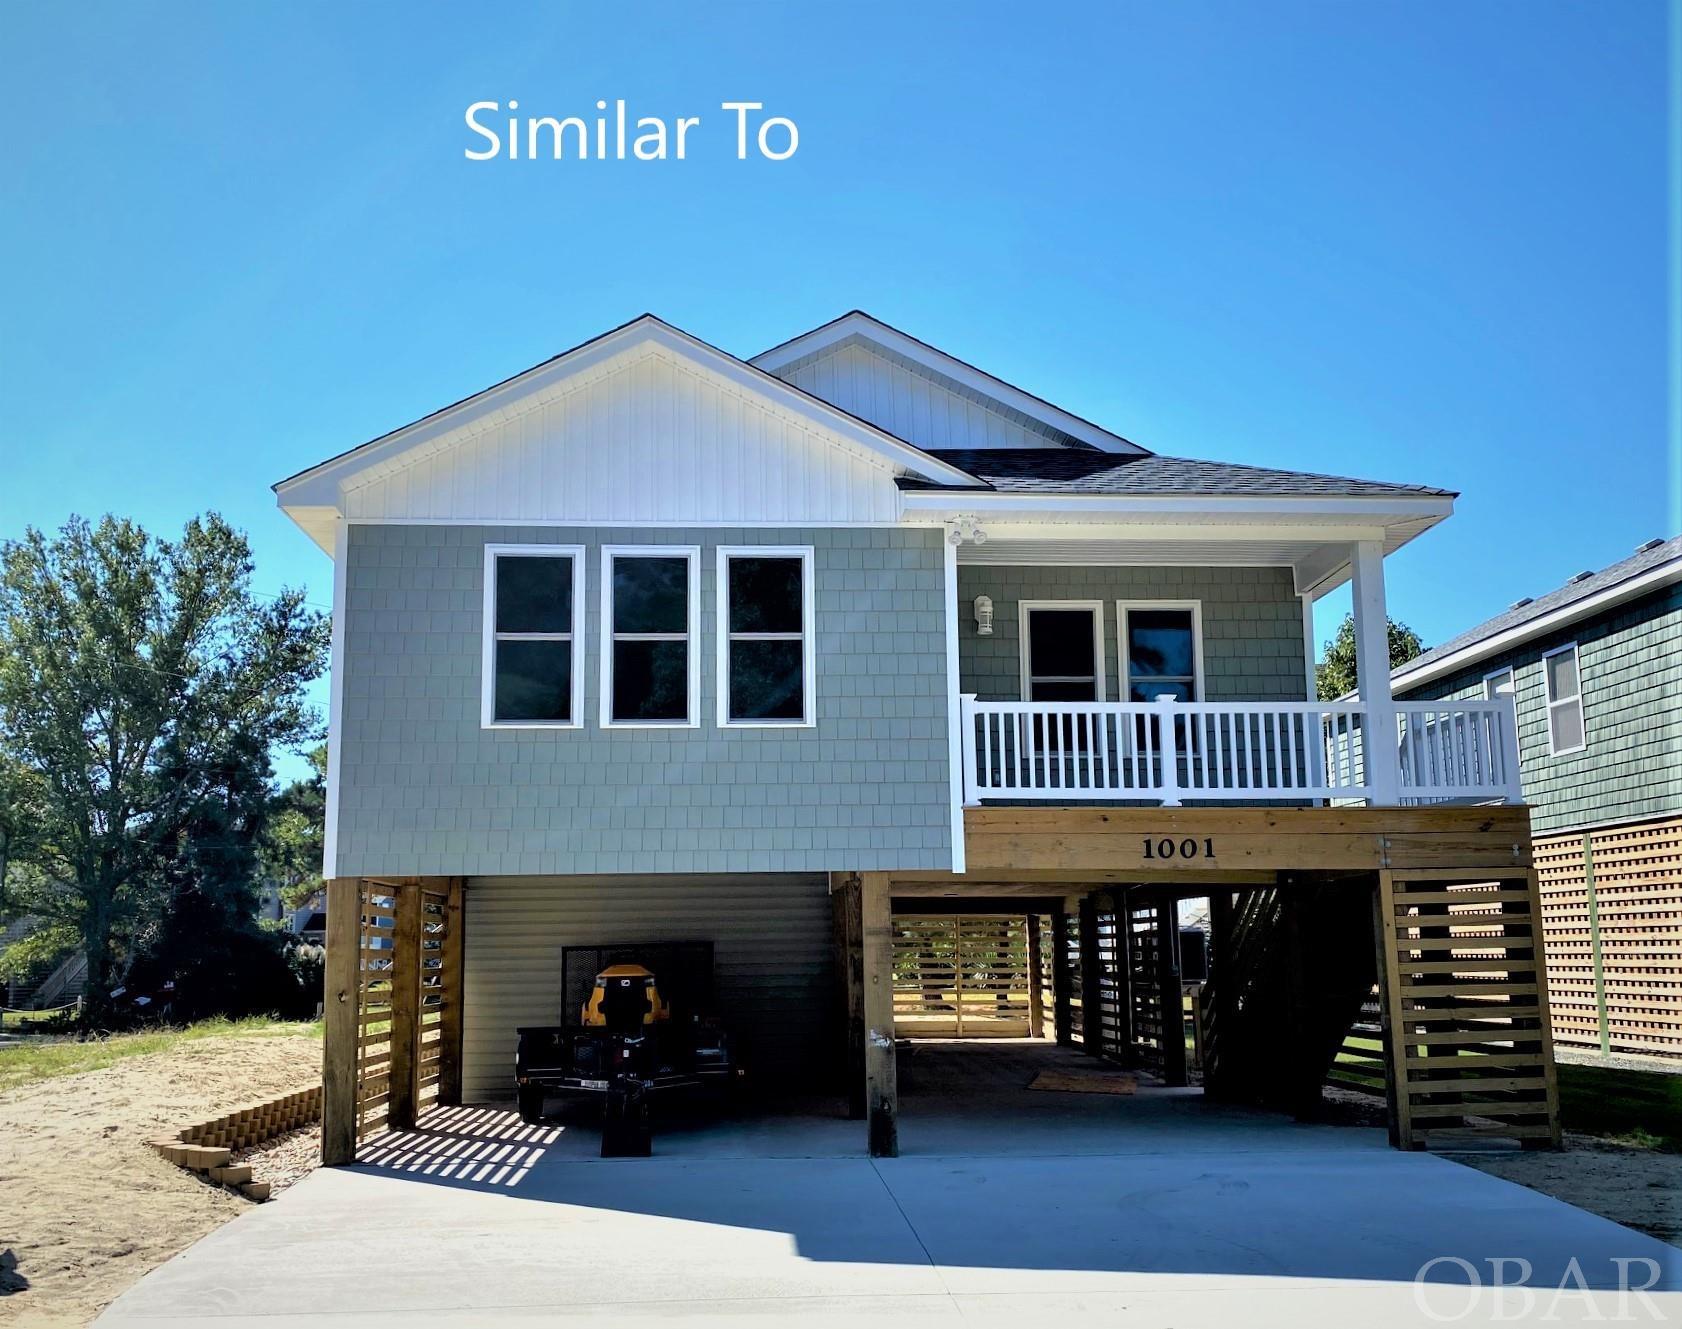 708 Colington Drive lot 142 Outer Banks Home Listings - Holleay Parcker - Spinnaker Realty Outer Banks (OBX) Real Estate